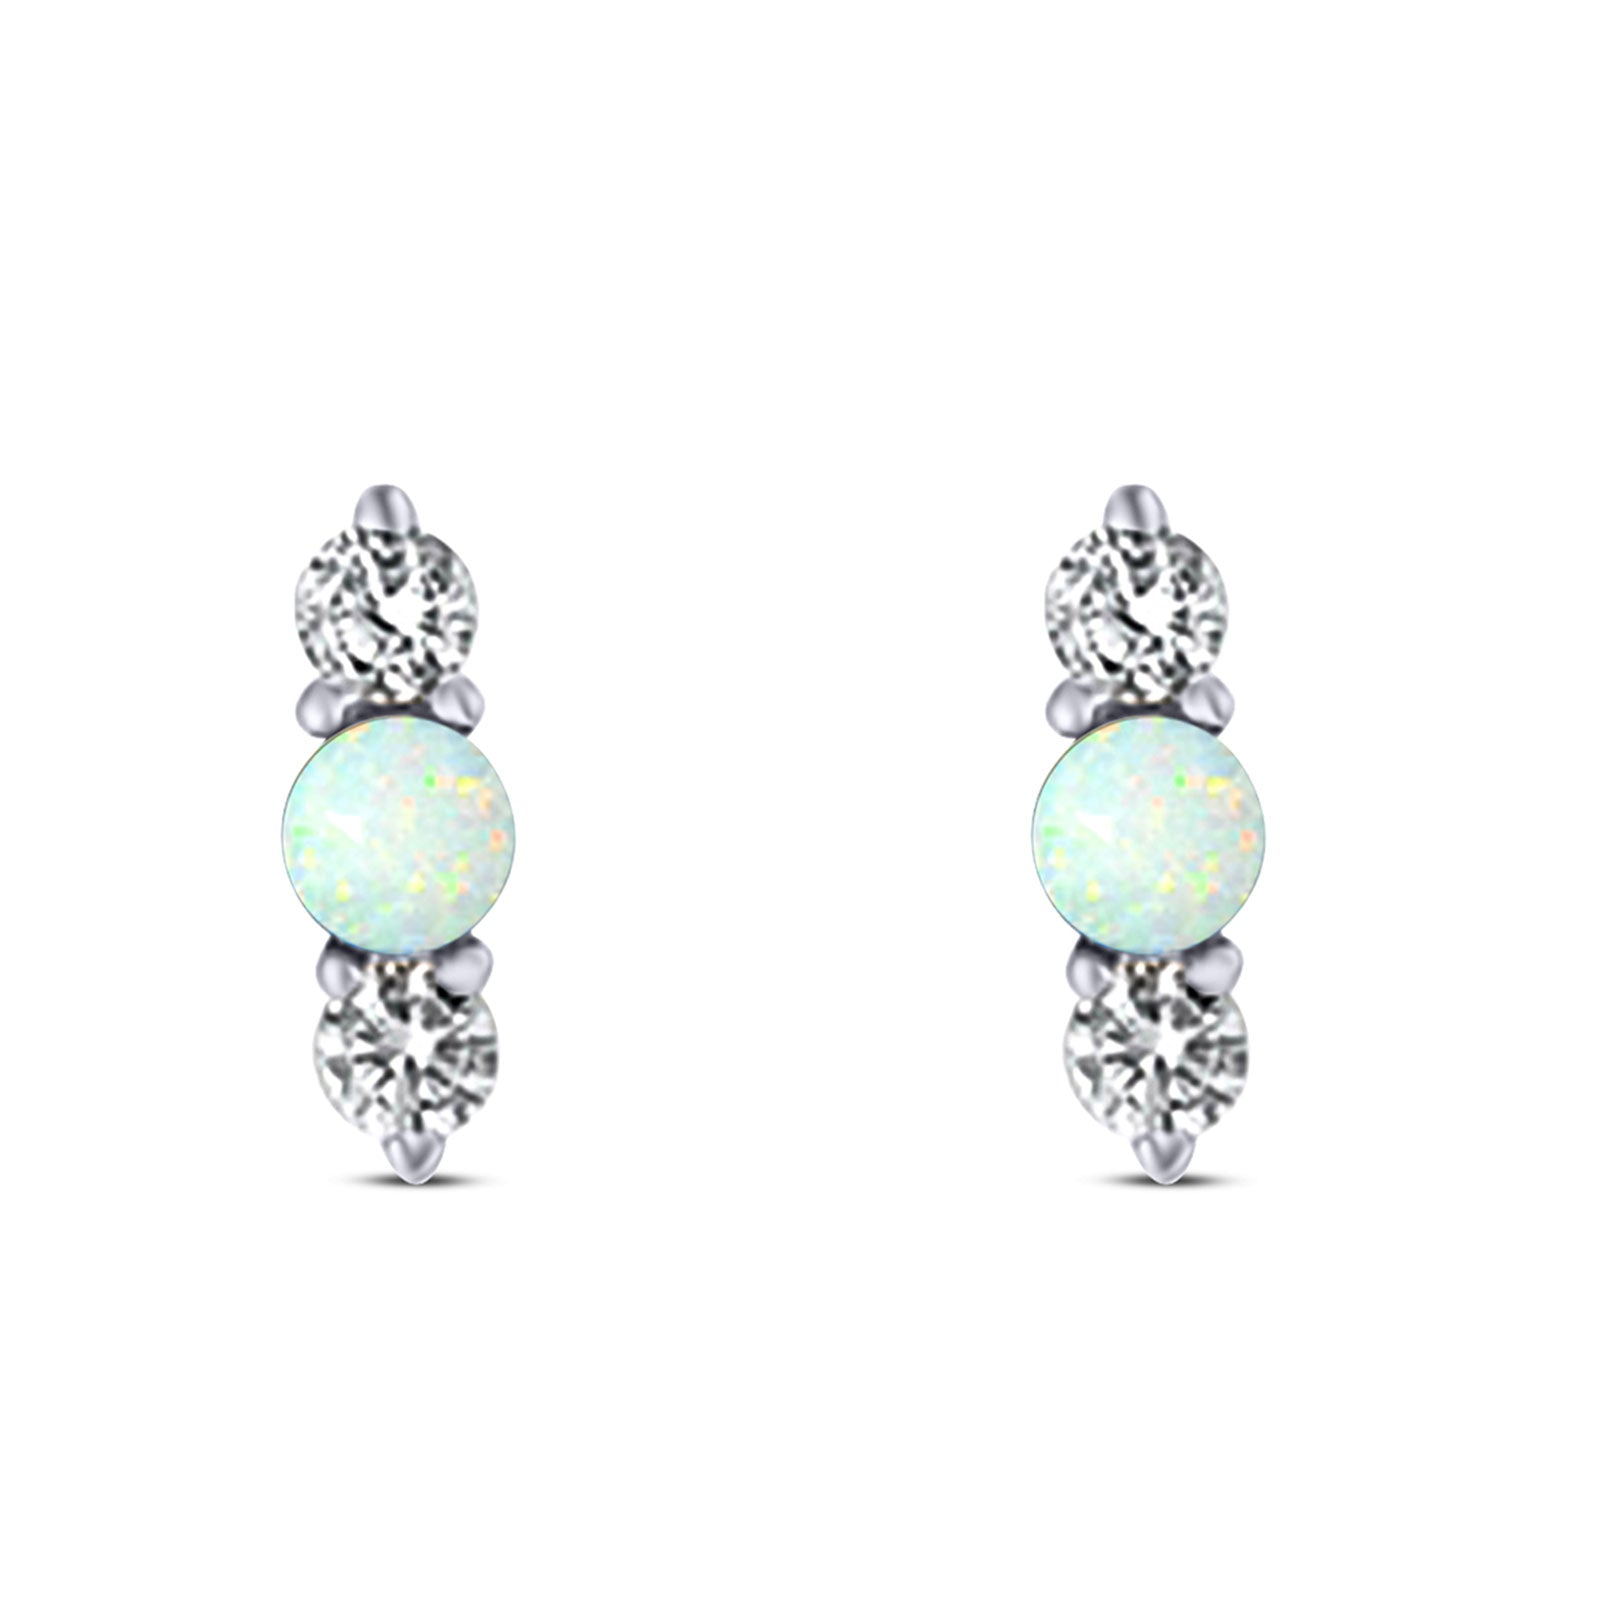 Art Deco Three Stone Stud Earring Simulated Cubic Zirconia Created White Opal Solid 925 Sterling Silver (9mm)